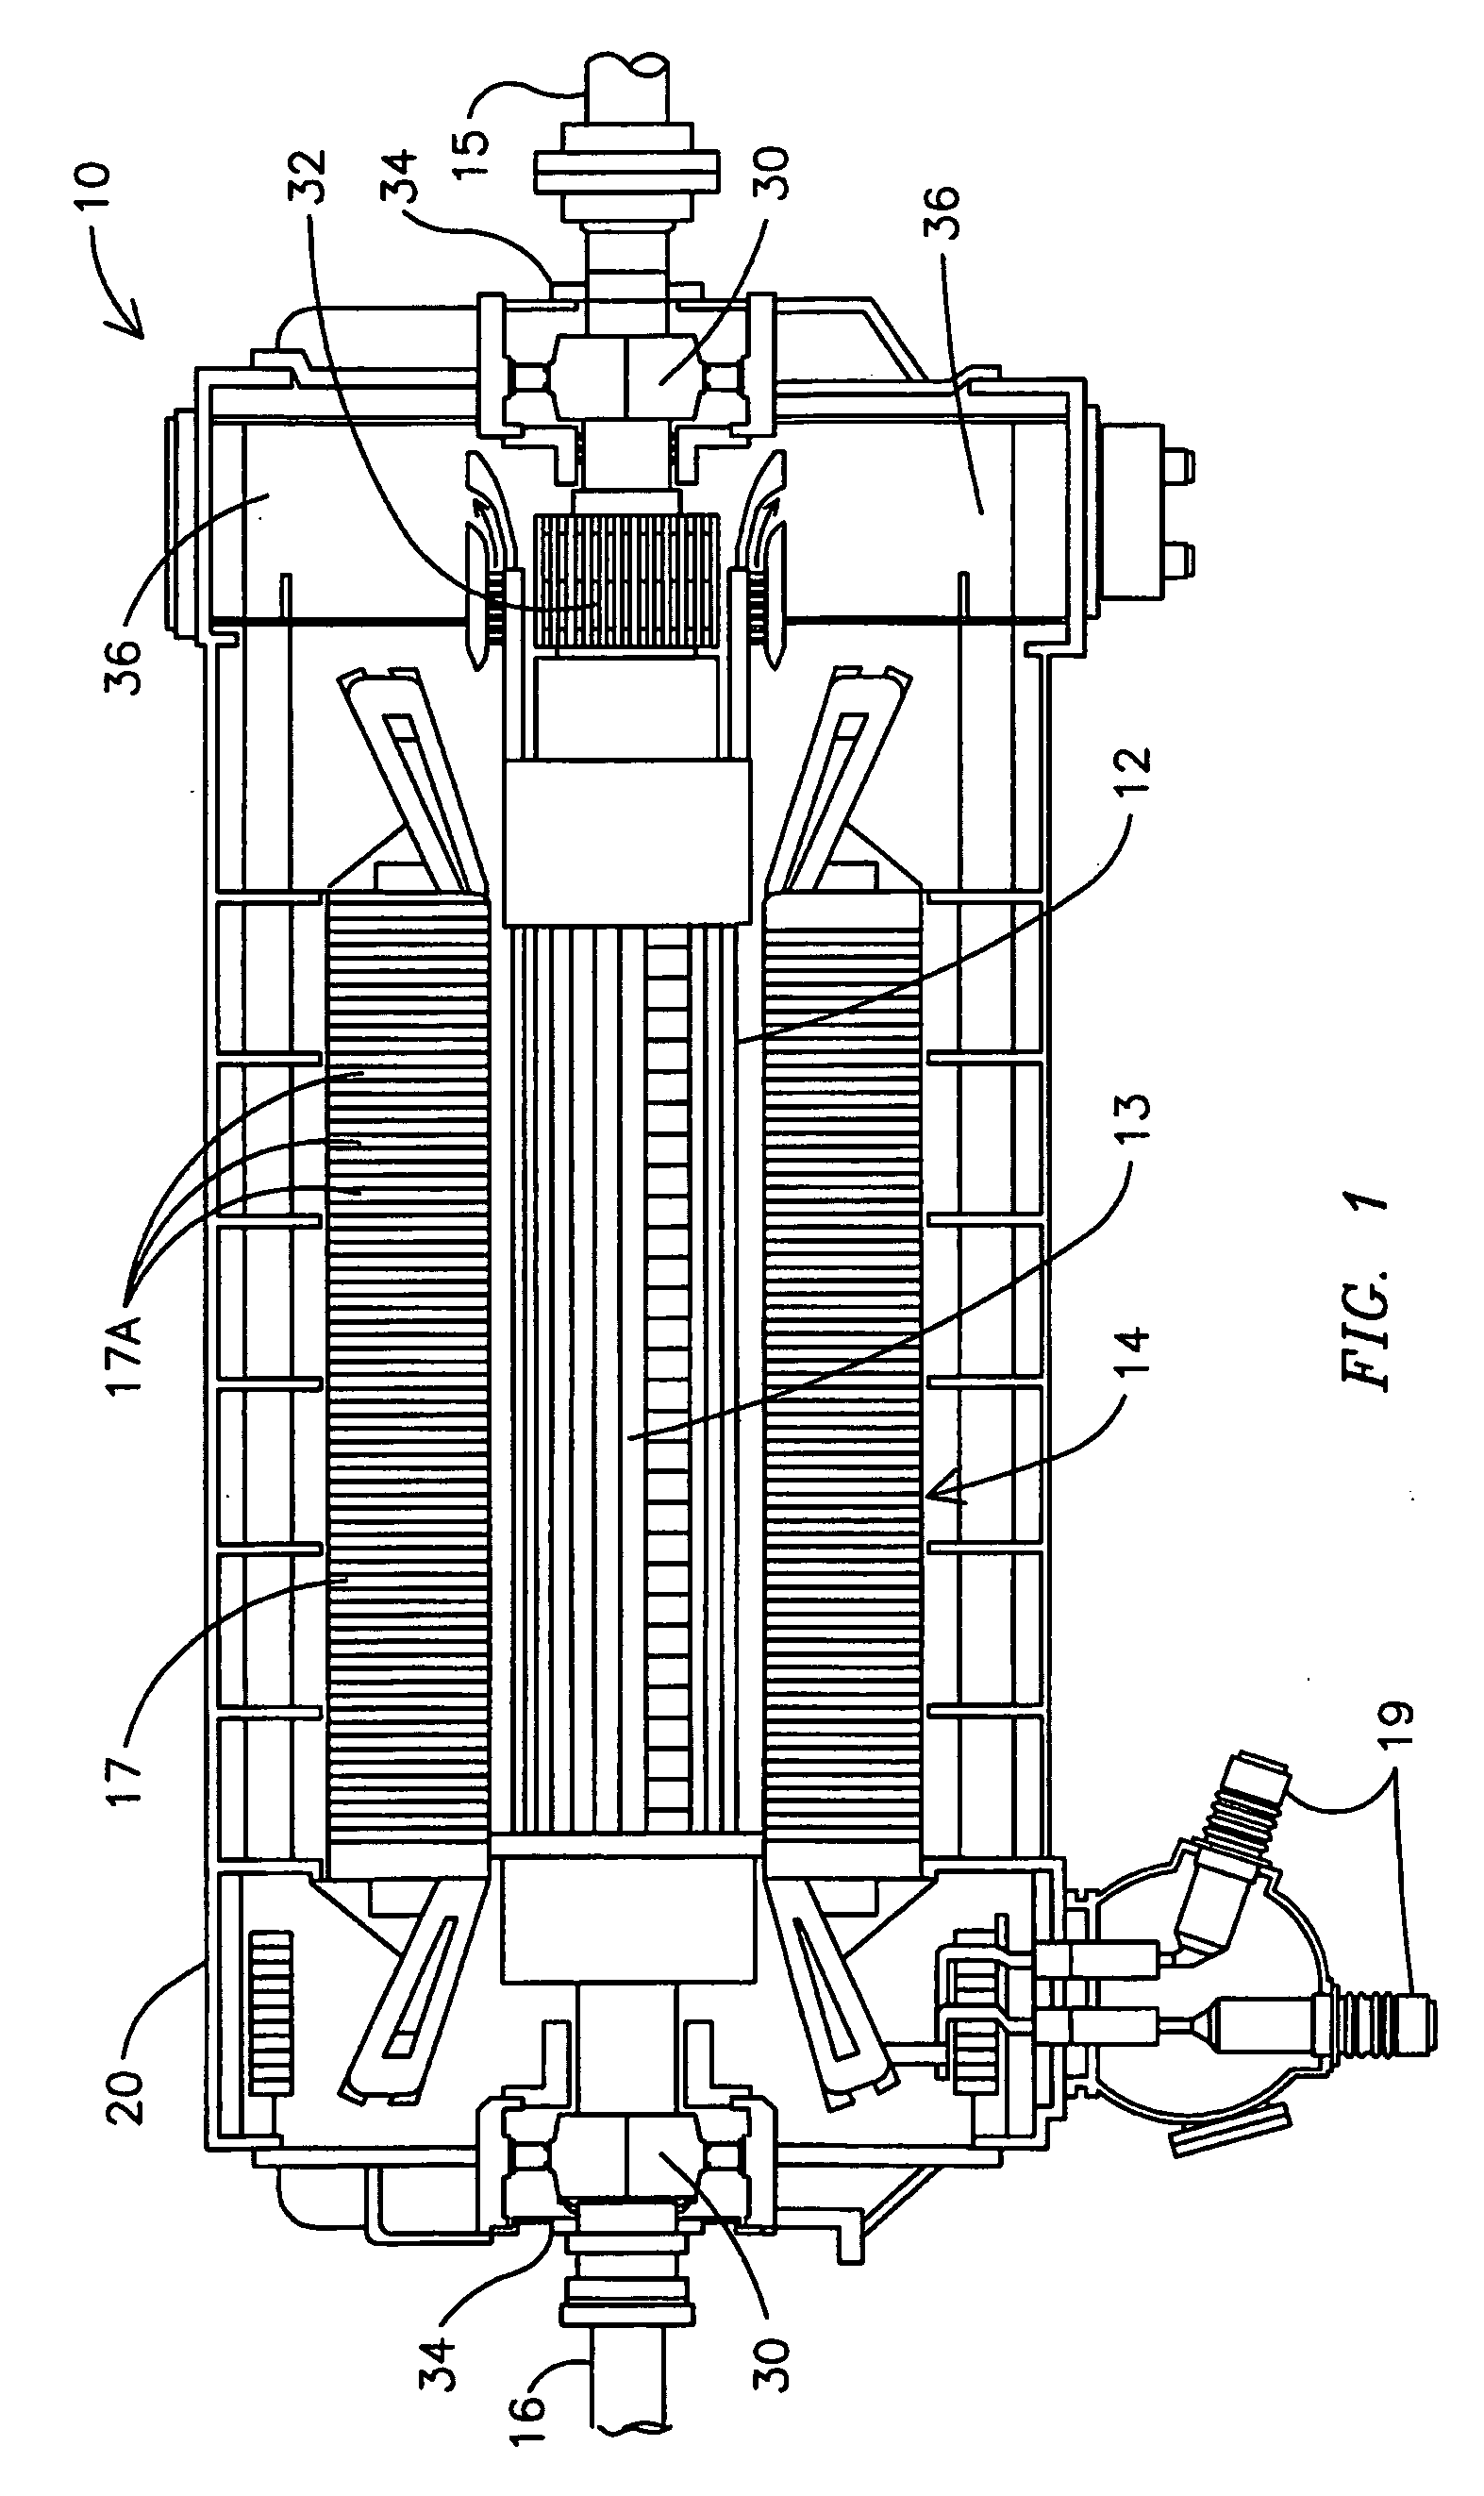 Superconducting coil support structures